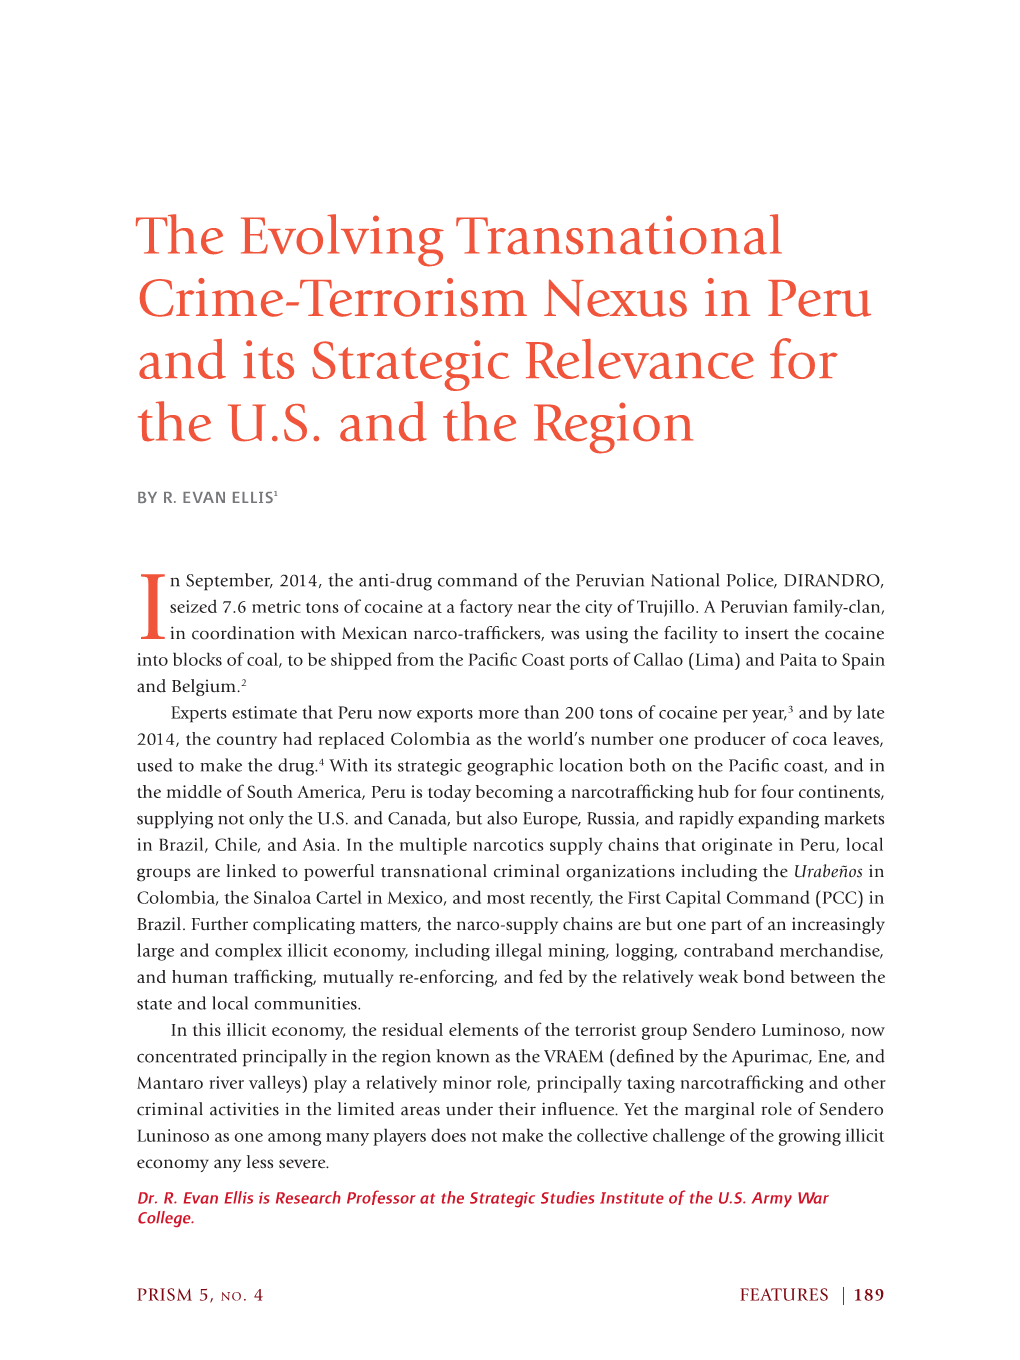 The Evolving Transnational Crime-Terrorism Nexus in Peru and Its Strategic Relevance for the U.S